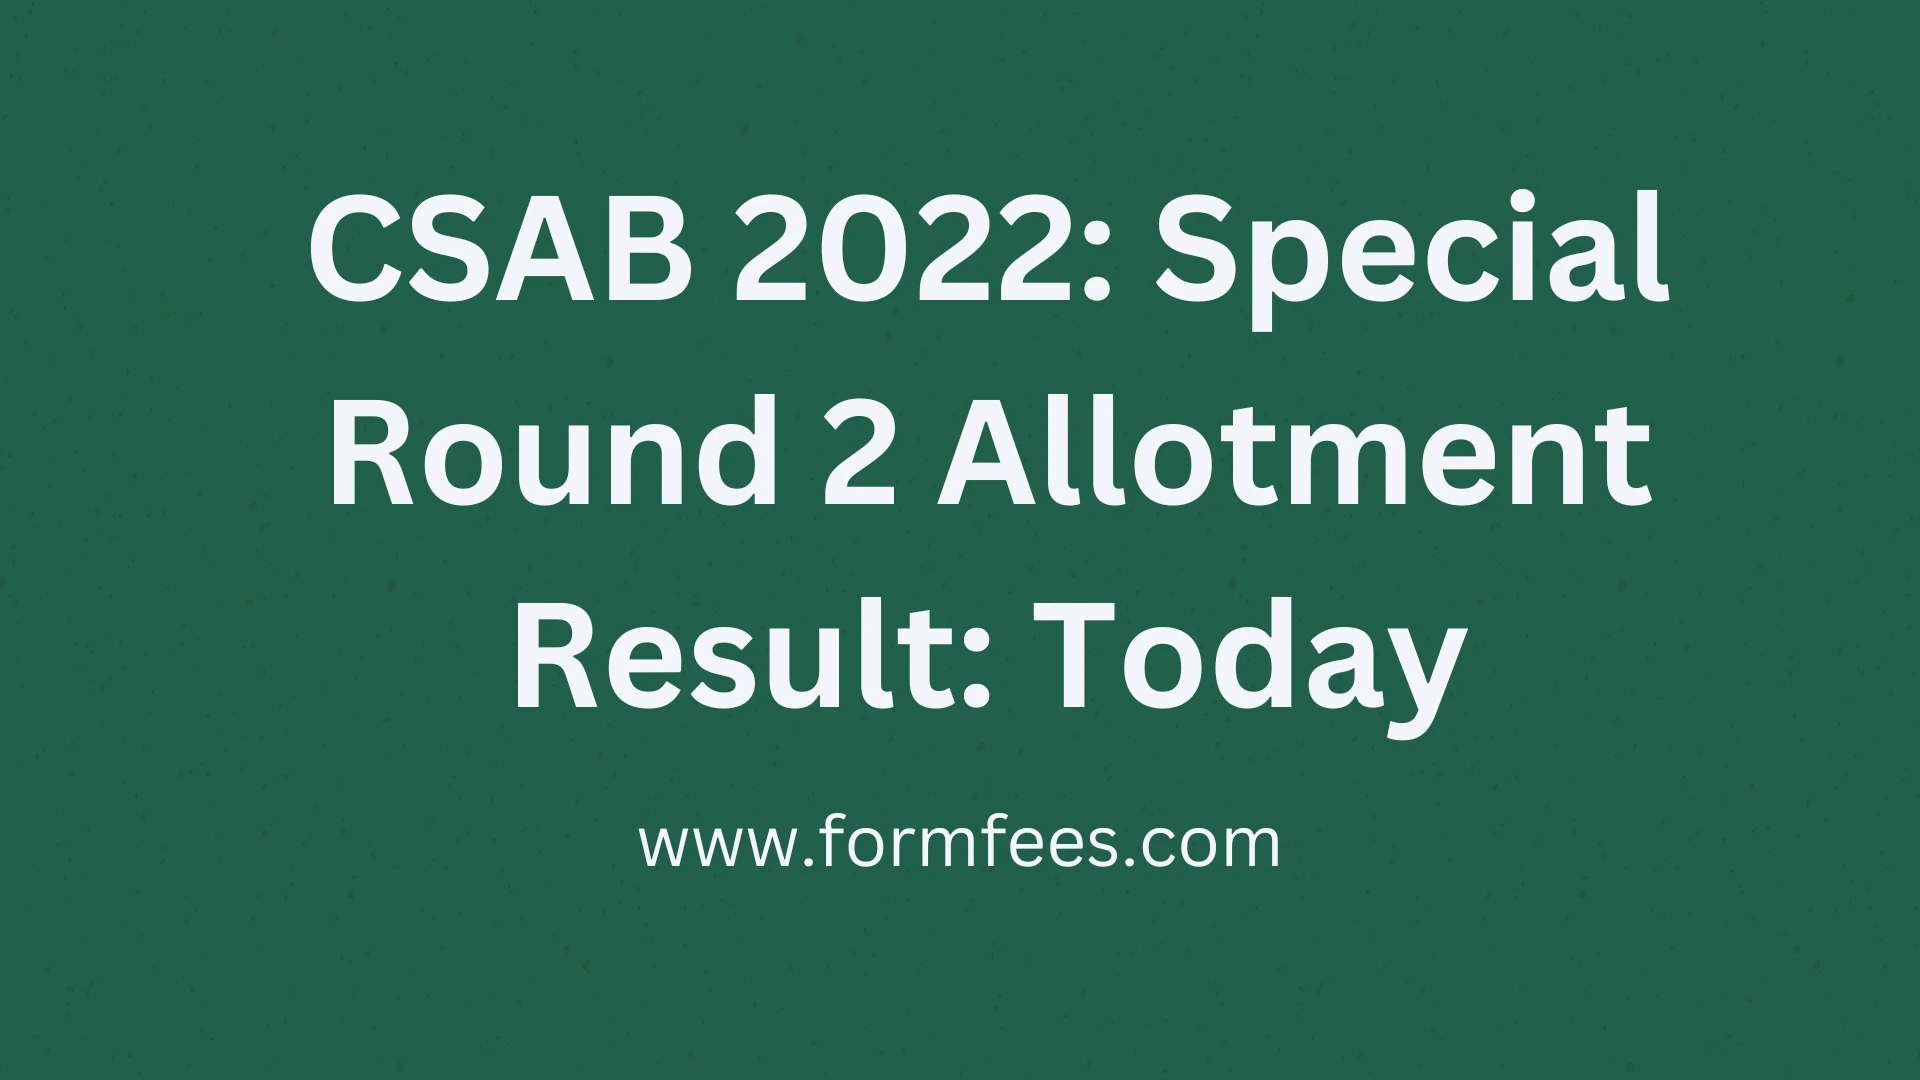 CSAB 2022 Special Round 2 Allotment Result Today